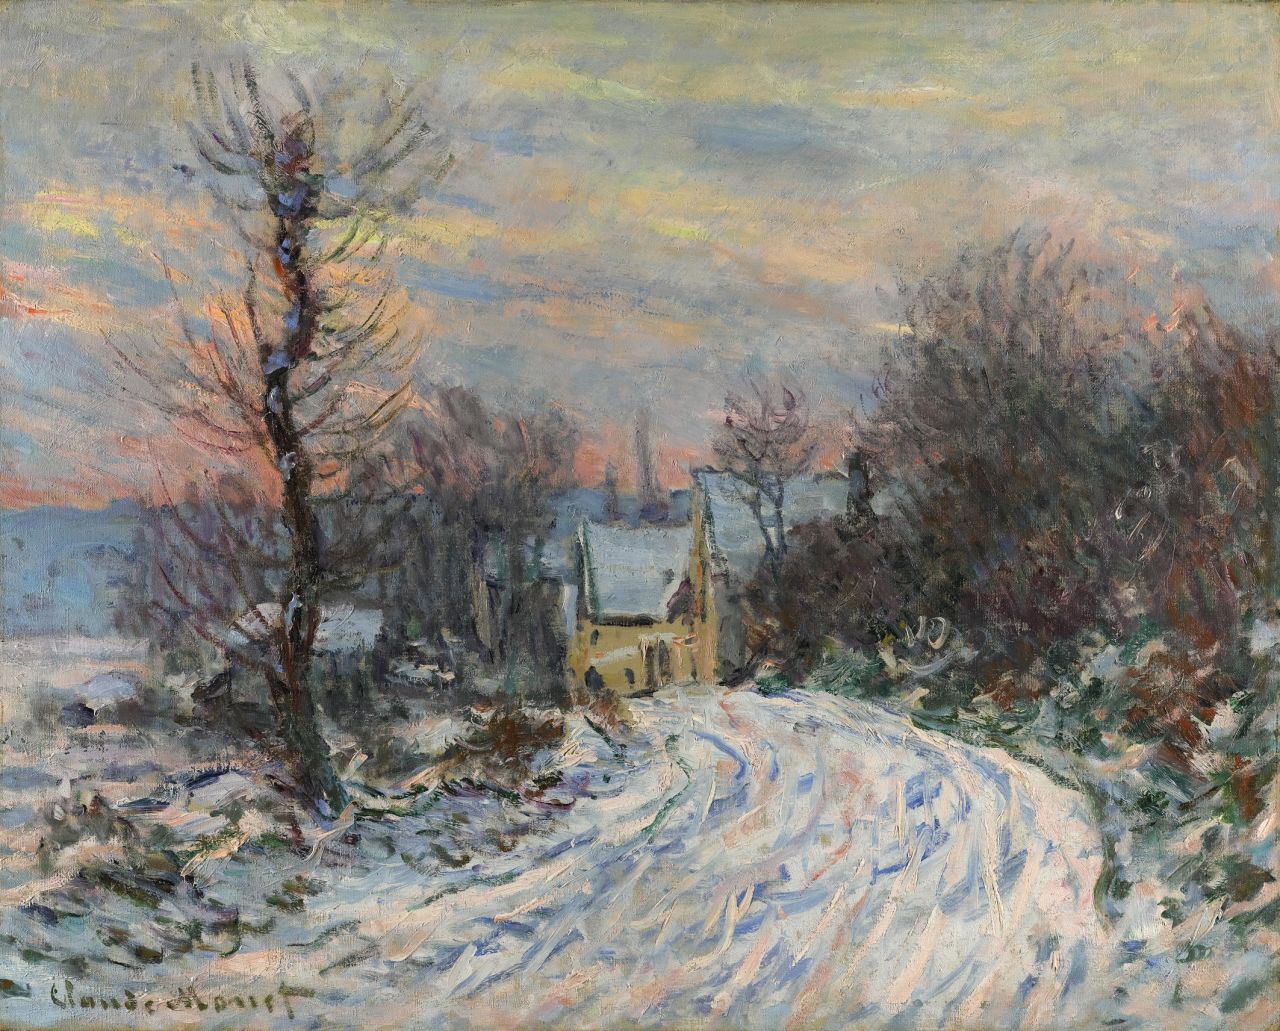 Claude Monet's "L'entree de Giverny en hiver," is a star lot at Sotheby's Impressionist and Modern Art Evening Sale in London Wednesday.